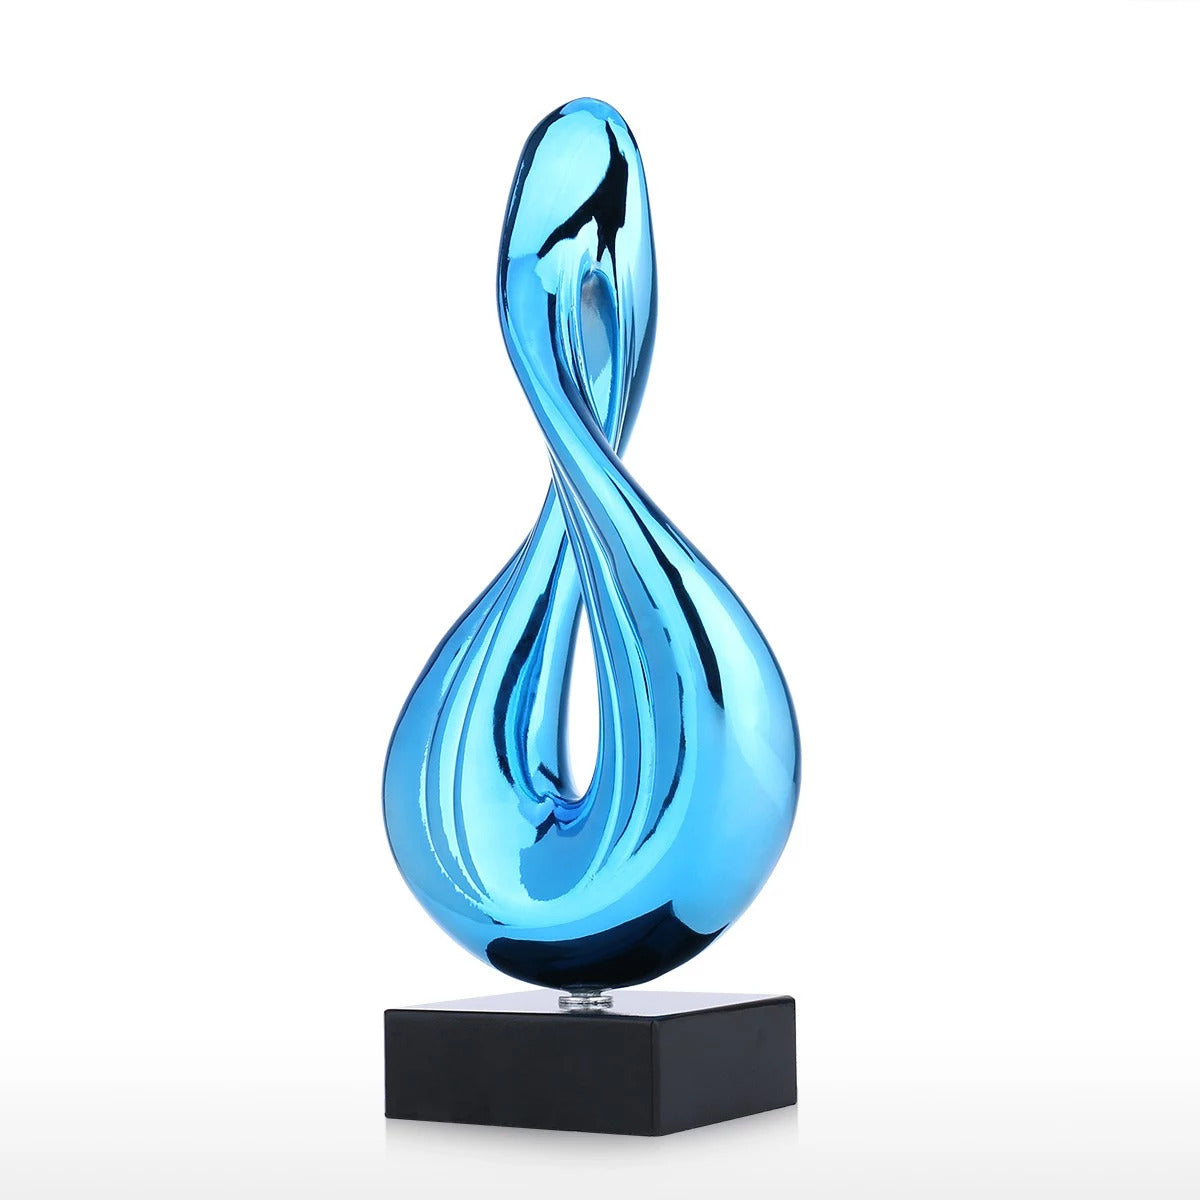 Abstract Sculpture by Resin to Blue Bedroom & Living Room Decor Home Accessories for Housewarming and New Home Gifts